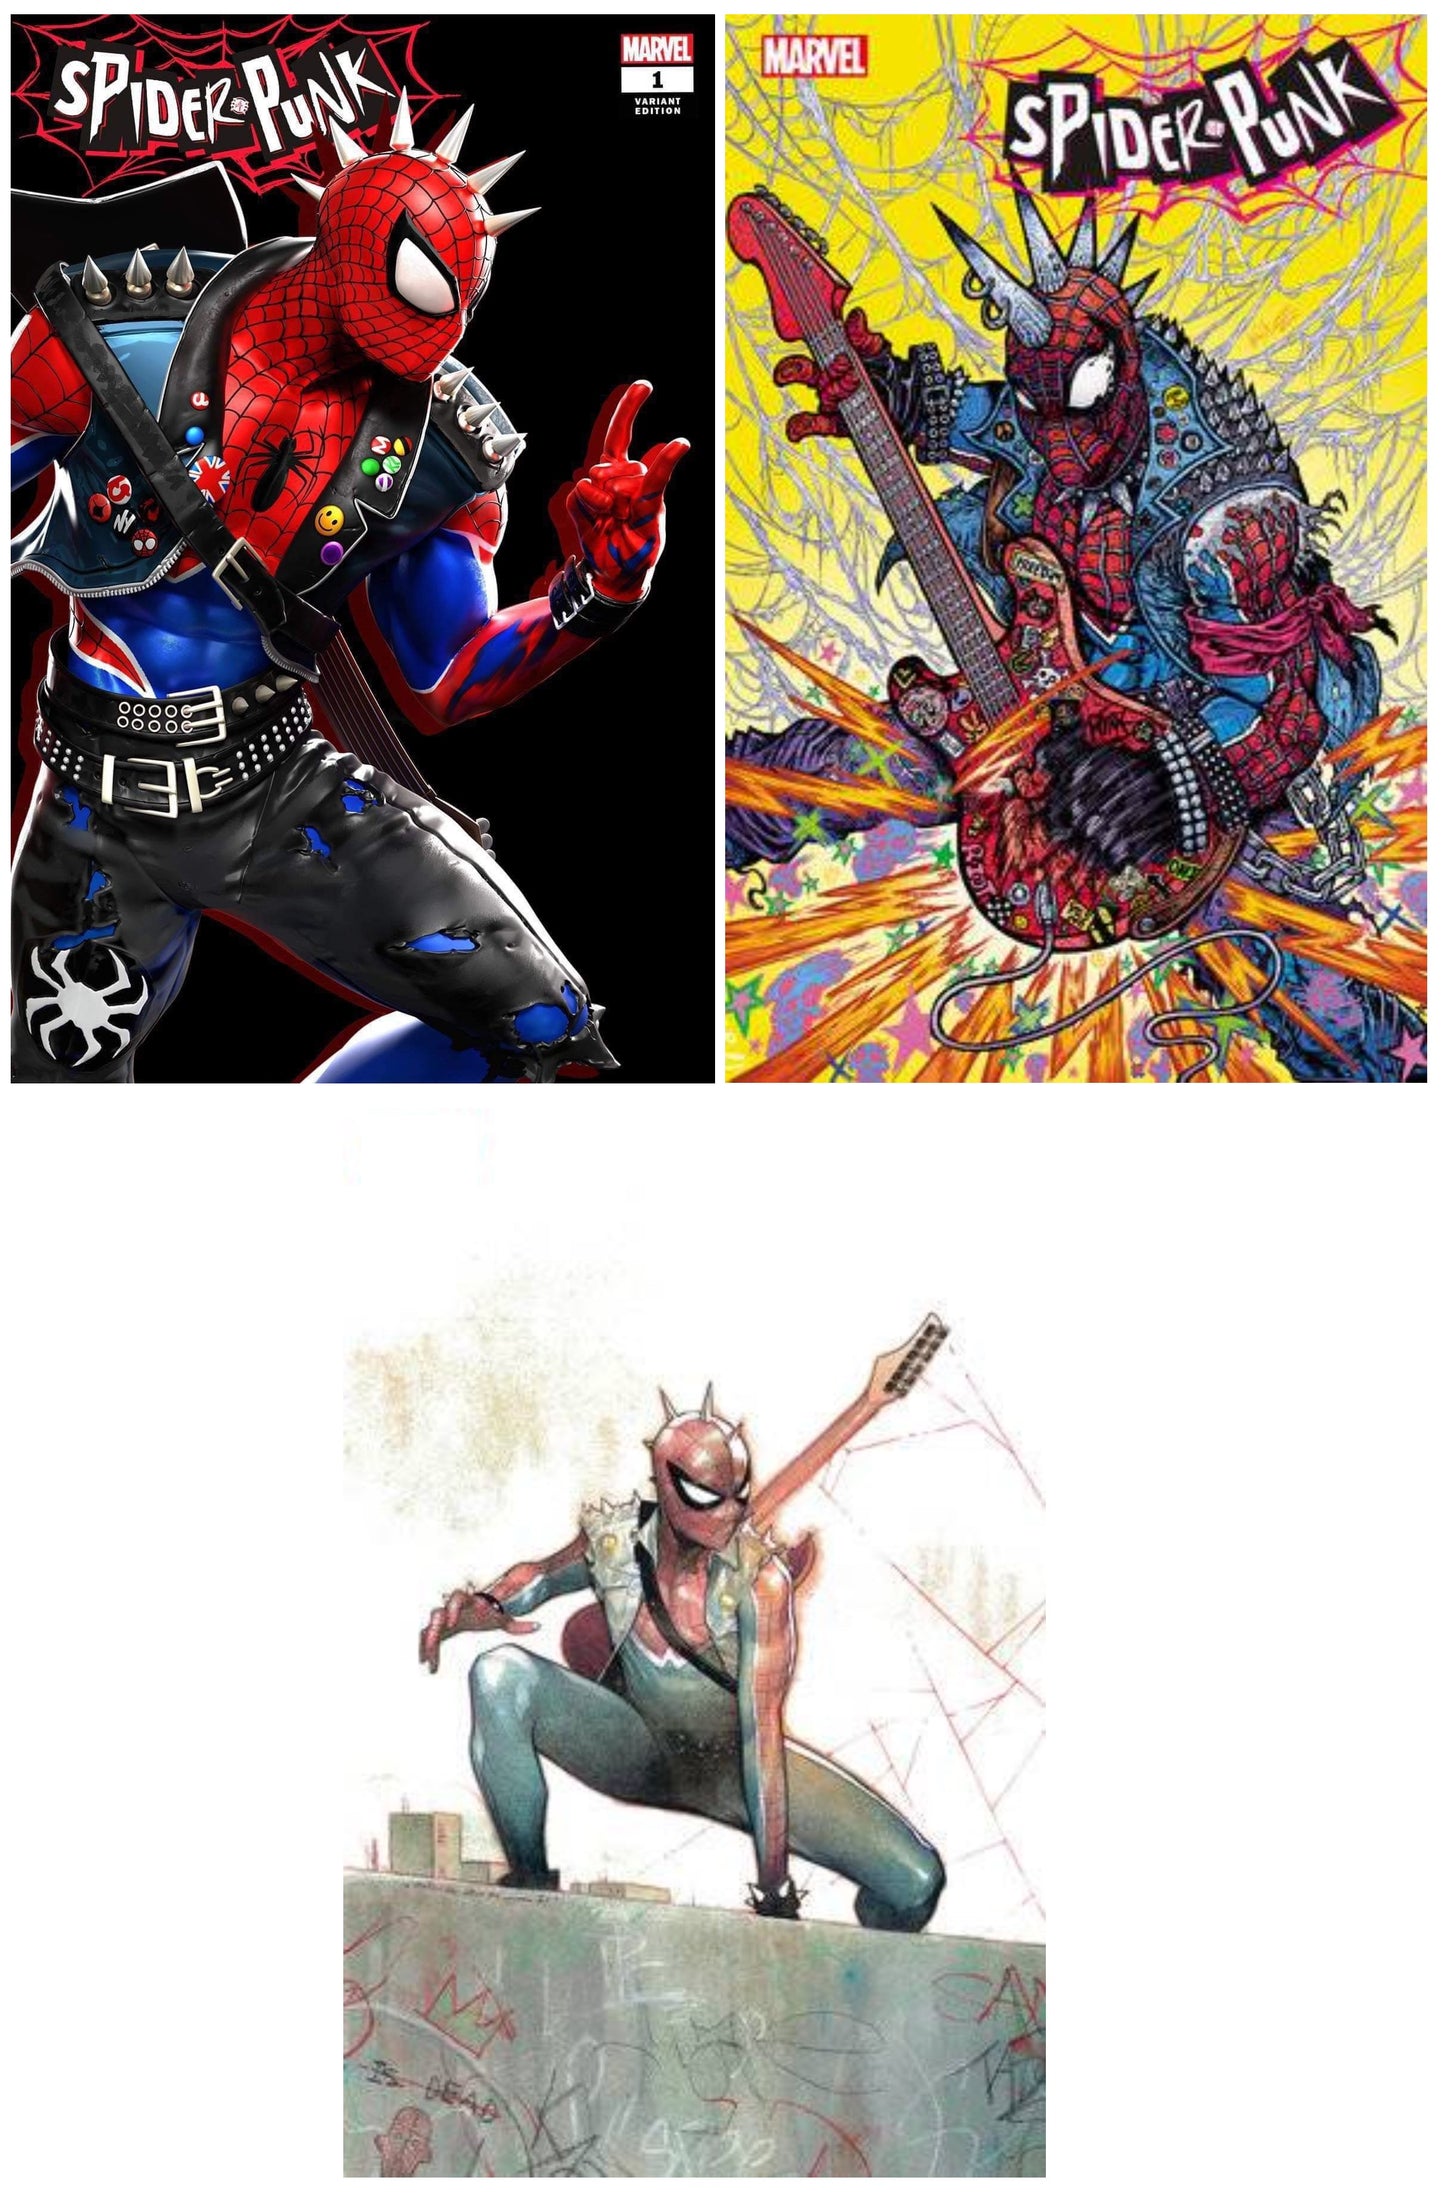 SPIDER-PUNK ARMS RACE #1 RAFAEL GRASSETTI VARIANT LIMITED TO 500 COPIES WITH NUMBERED COA + 1:25 & 1:100 VARIANTS